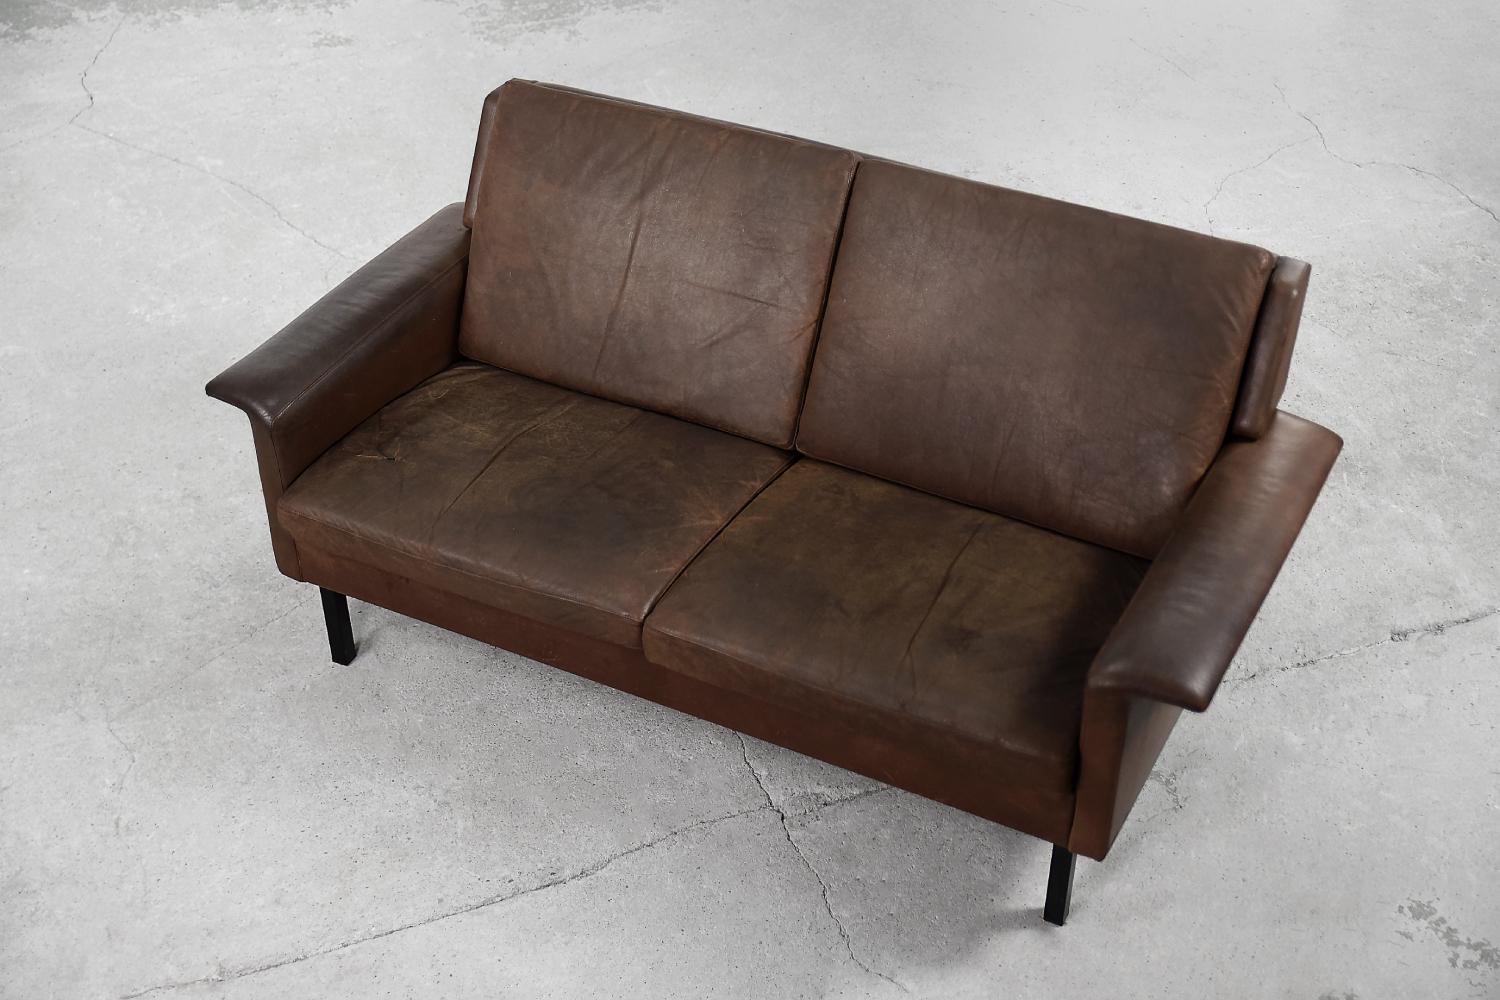 Mid-Century Modern 2-Seater Brown Leather Sofa3330 by A. Vodder for Fritz Hansen For Sale 1